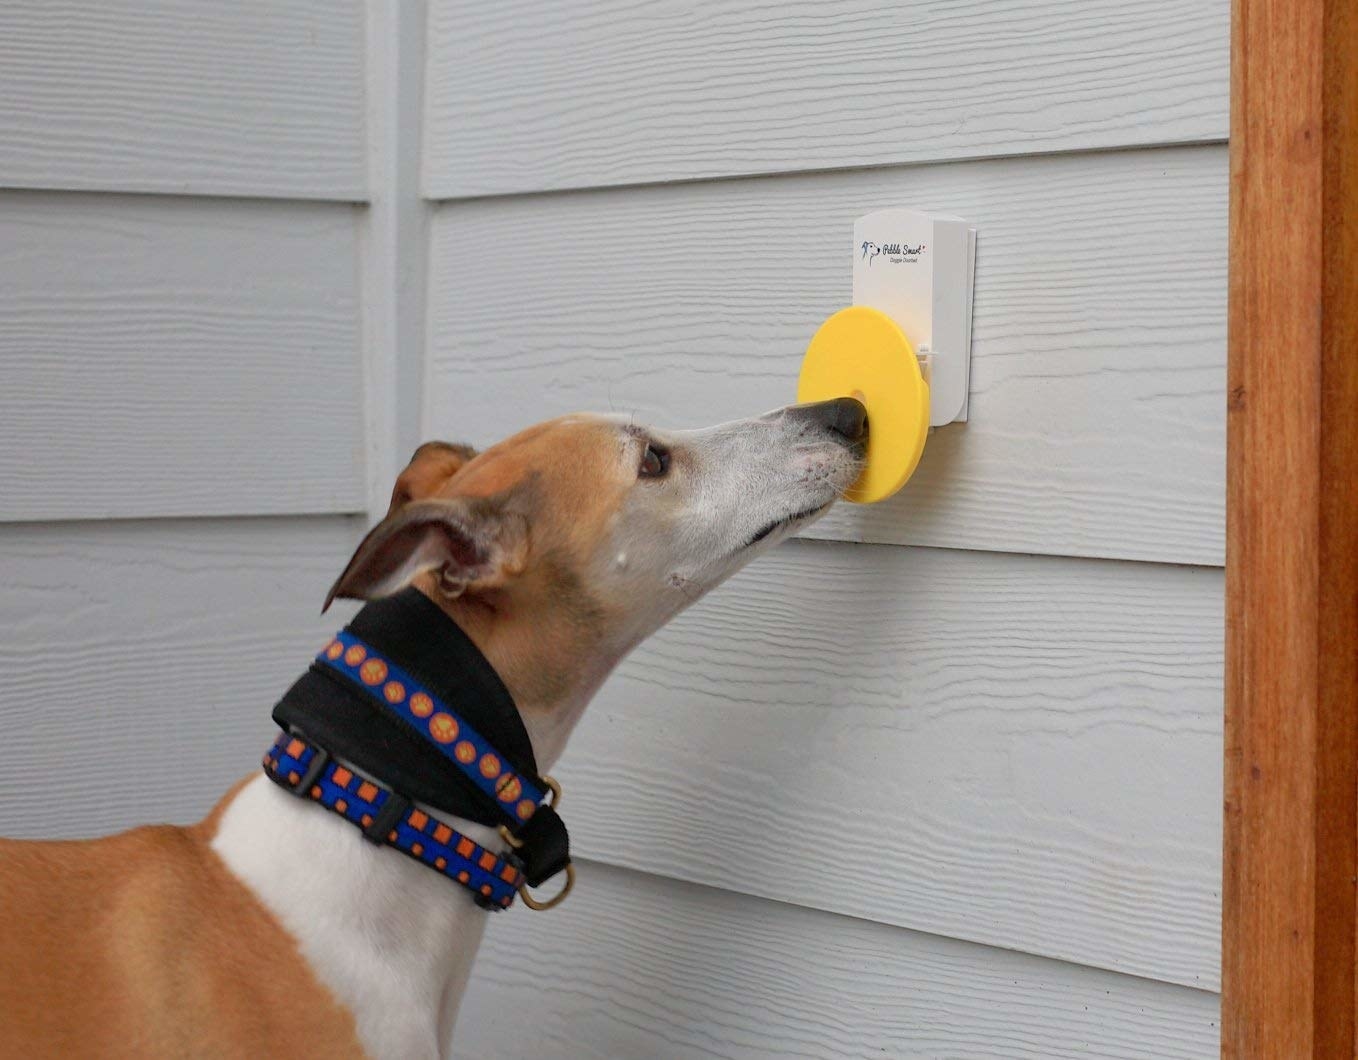 a dog touching their nose to the yellow doorbell button